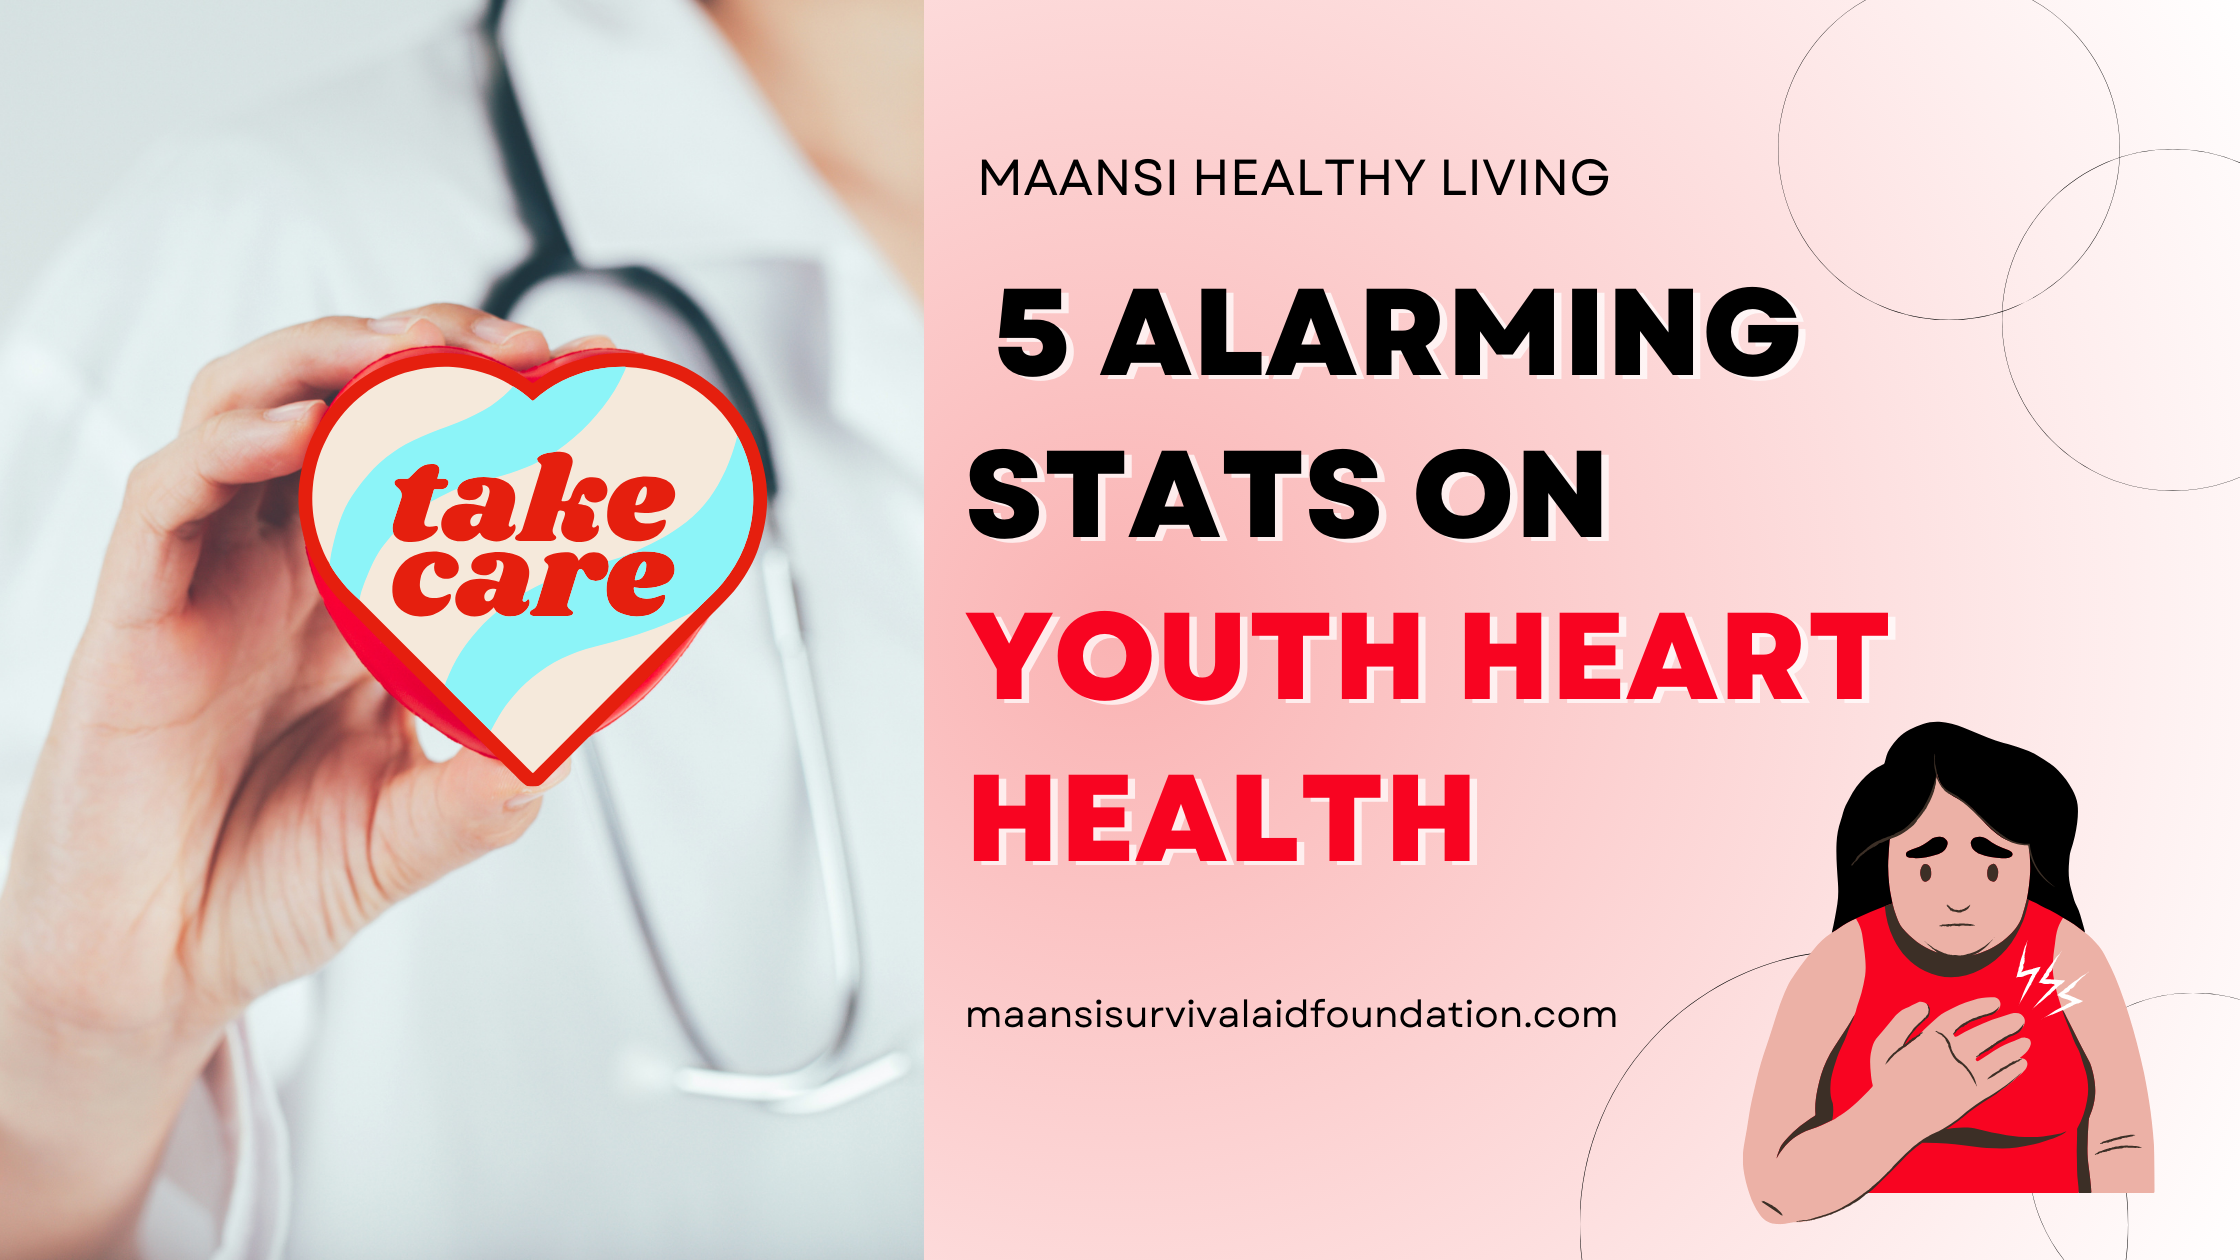 5 Alarming stats on youth heart health